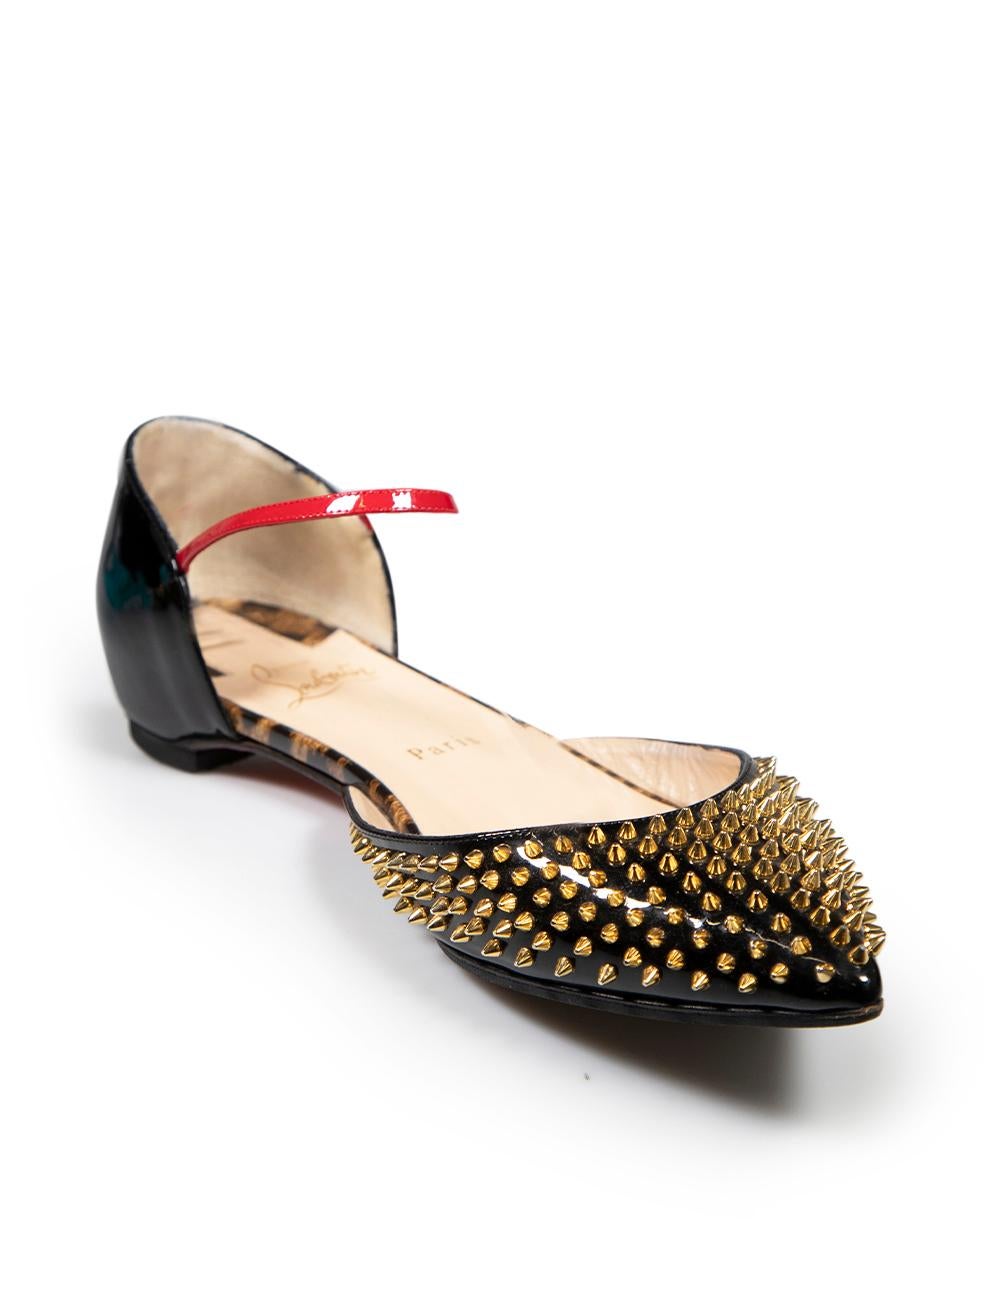 CONDITION is Very good. Minimal wear to shoes is evident. Minimal wear to both shoe footbeds with general creasing and light marks to the leather on this used Christian Louboutin designer resale item.
 
 Details
 Model: Baila
 Black
 Patent leather
